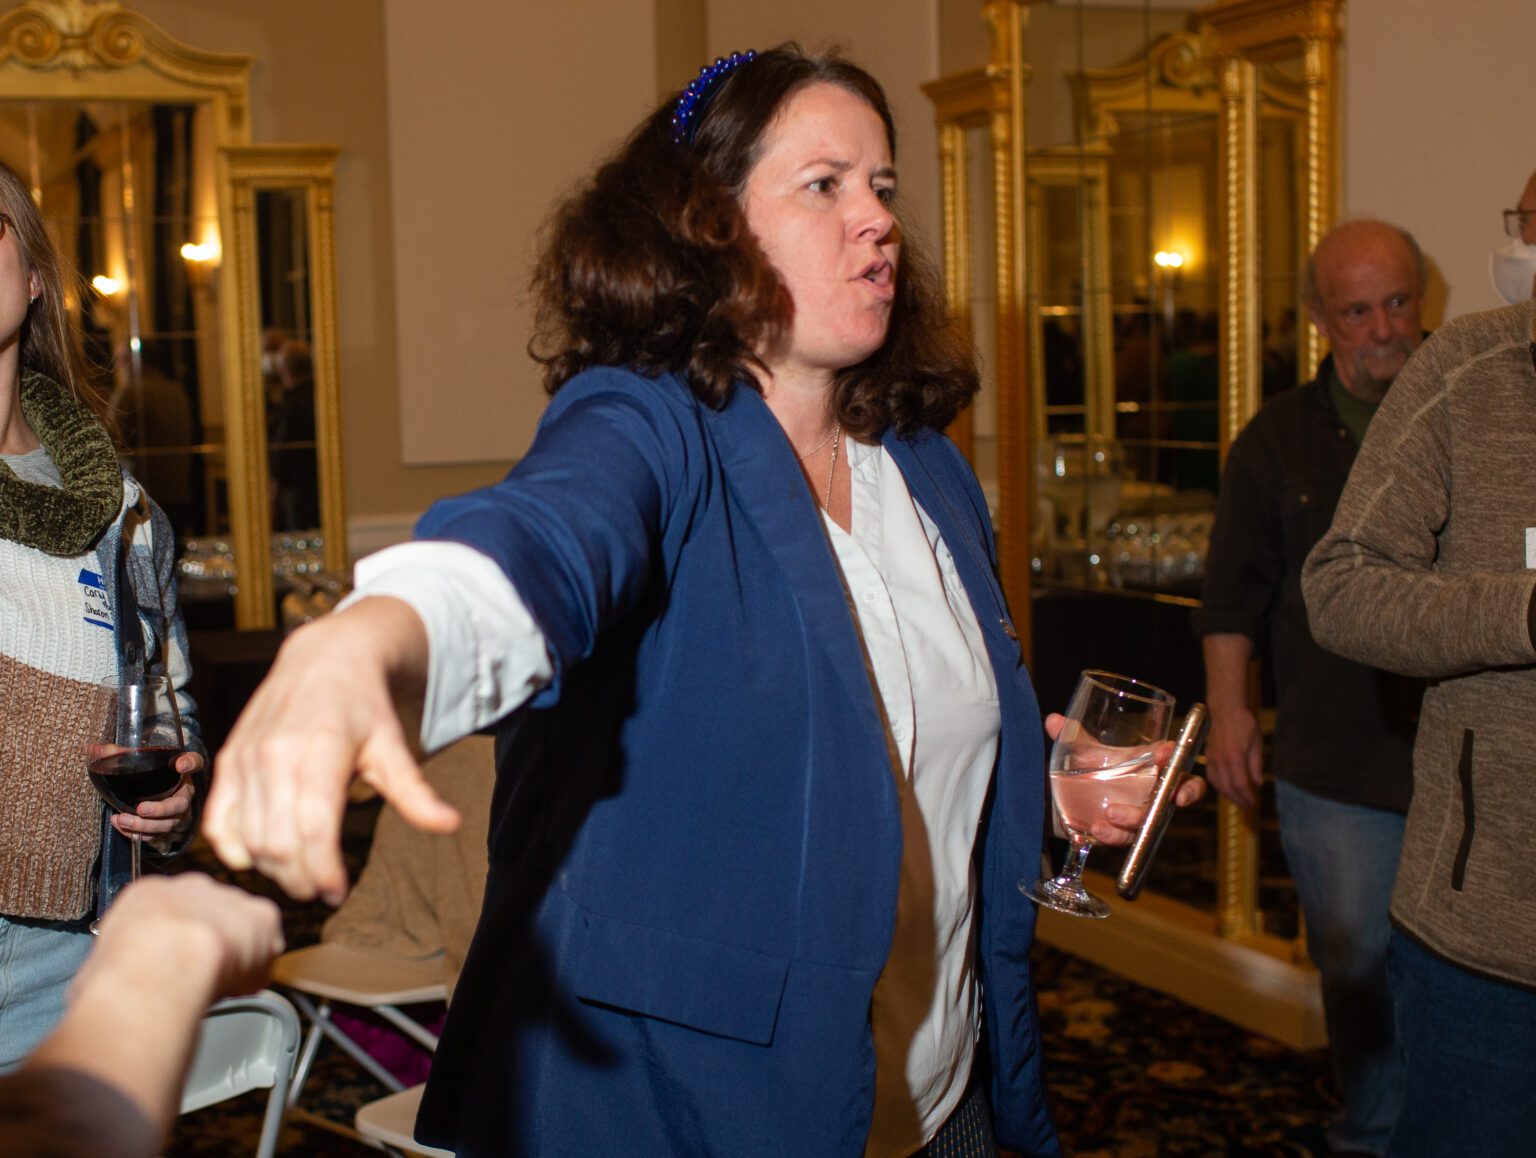 Rep. Sharon Shewmake receives a congratulatory fist bump after finding out the first round of results at Hotel Leo on Nov. 8. Shewmake led over her opponent